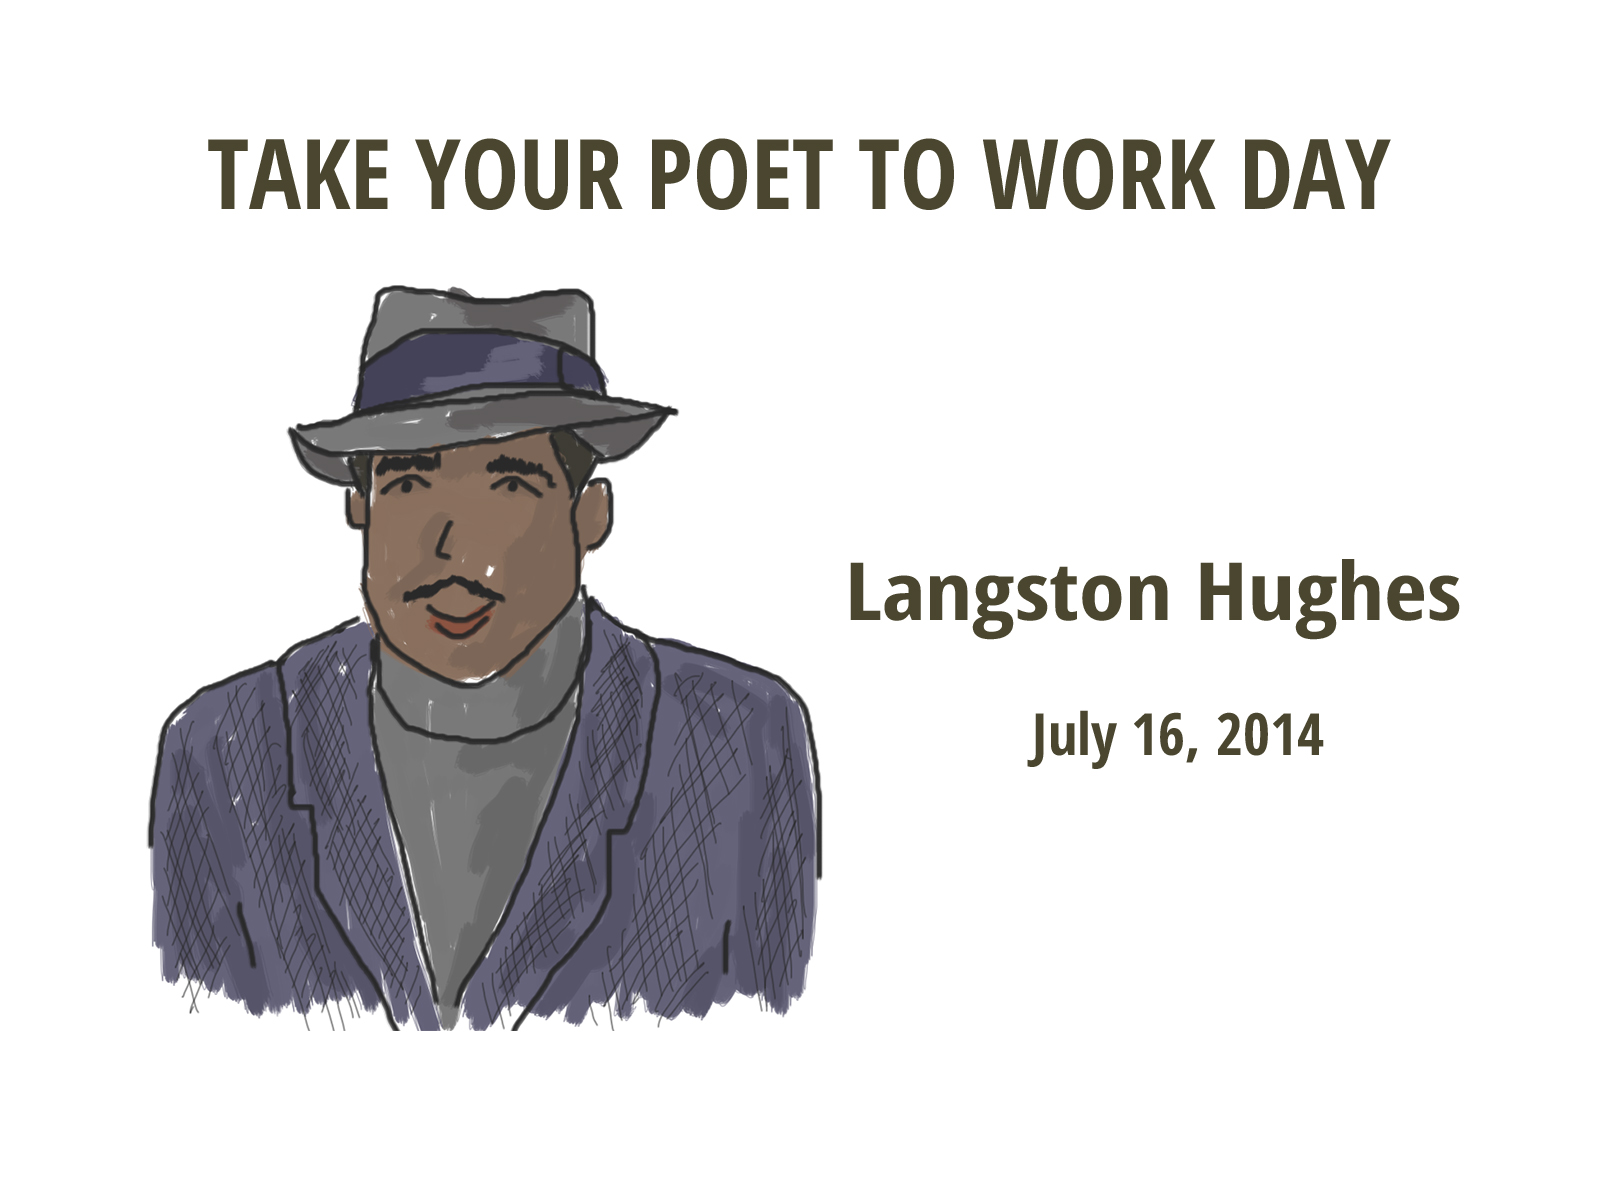 Take Your Poet to Work Langston Hughes cover